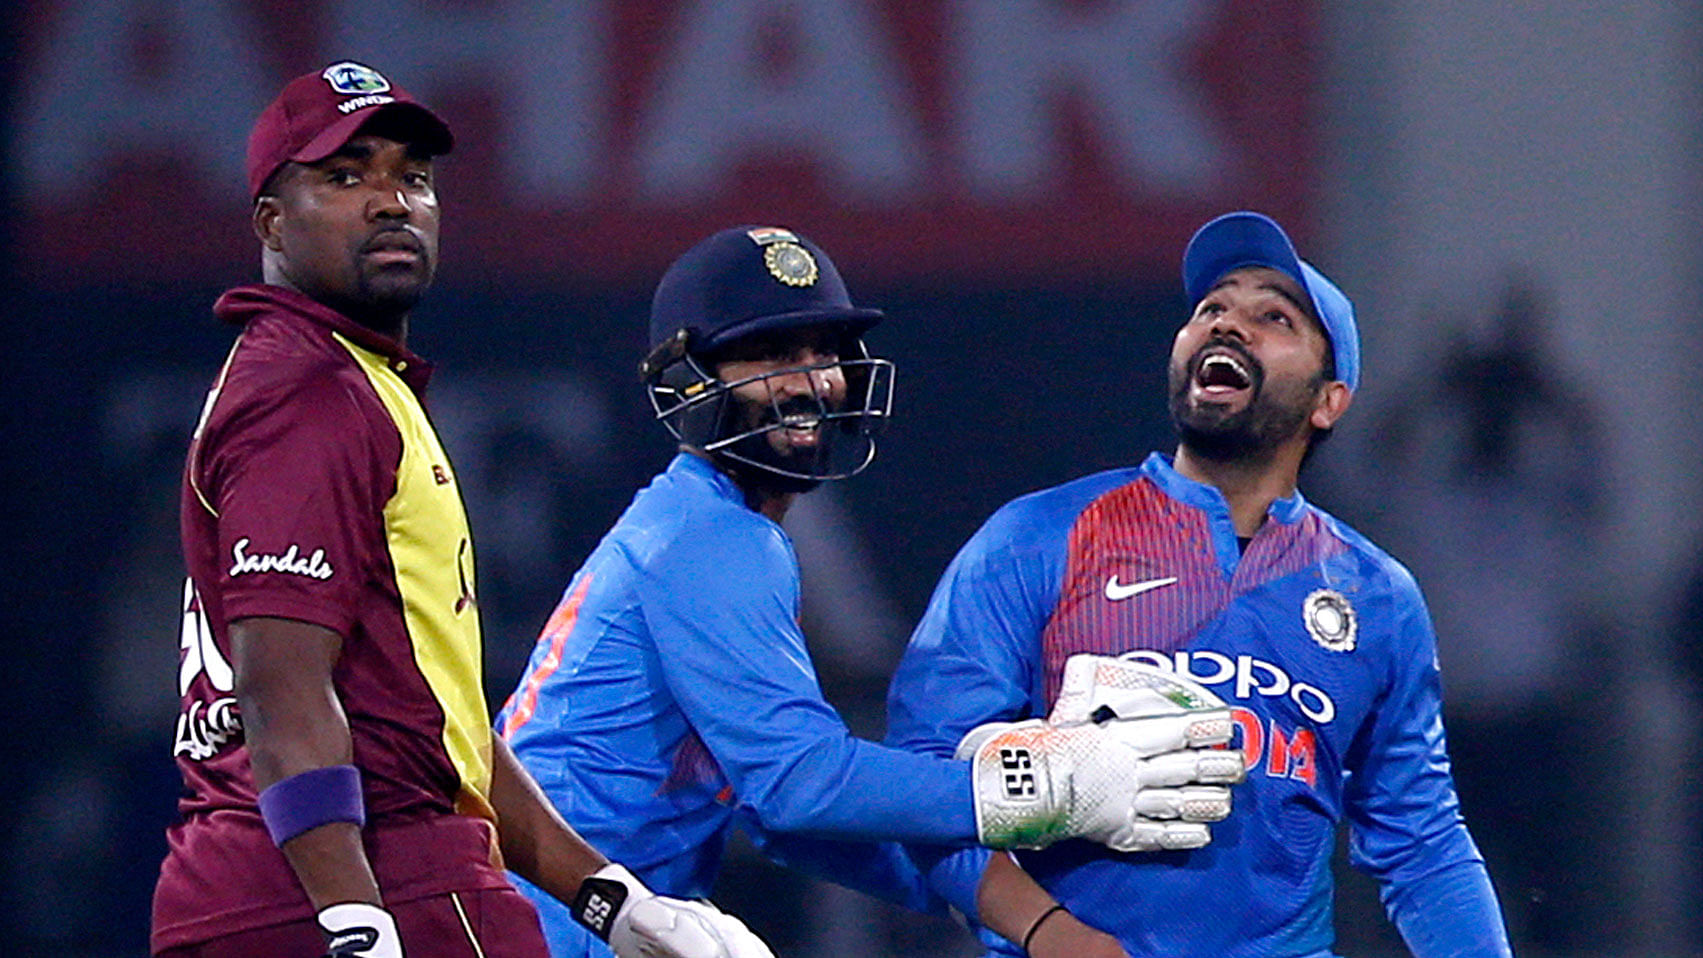  India beat West Indies by 71 runs in the second T20 International.